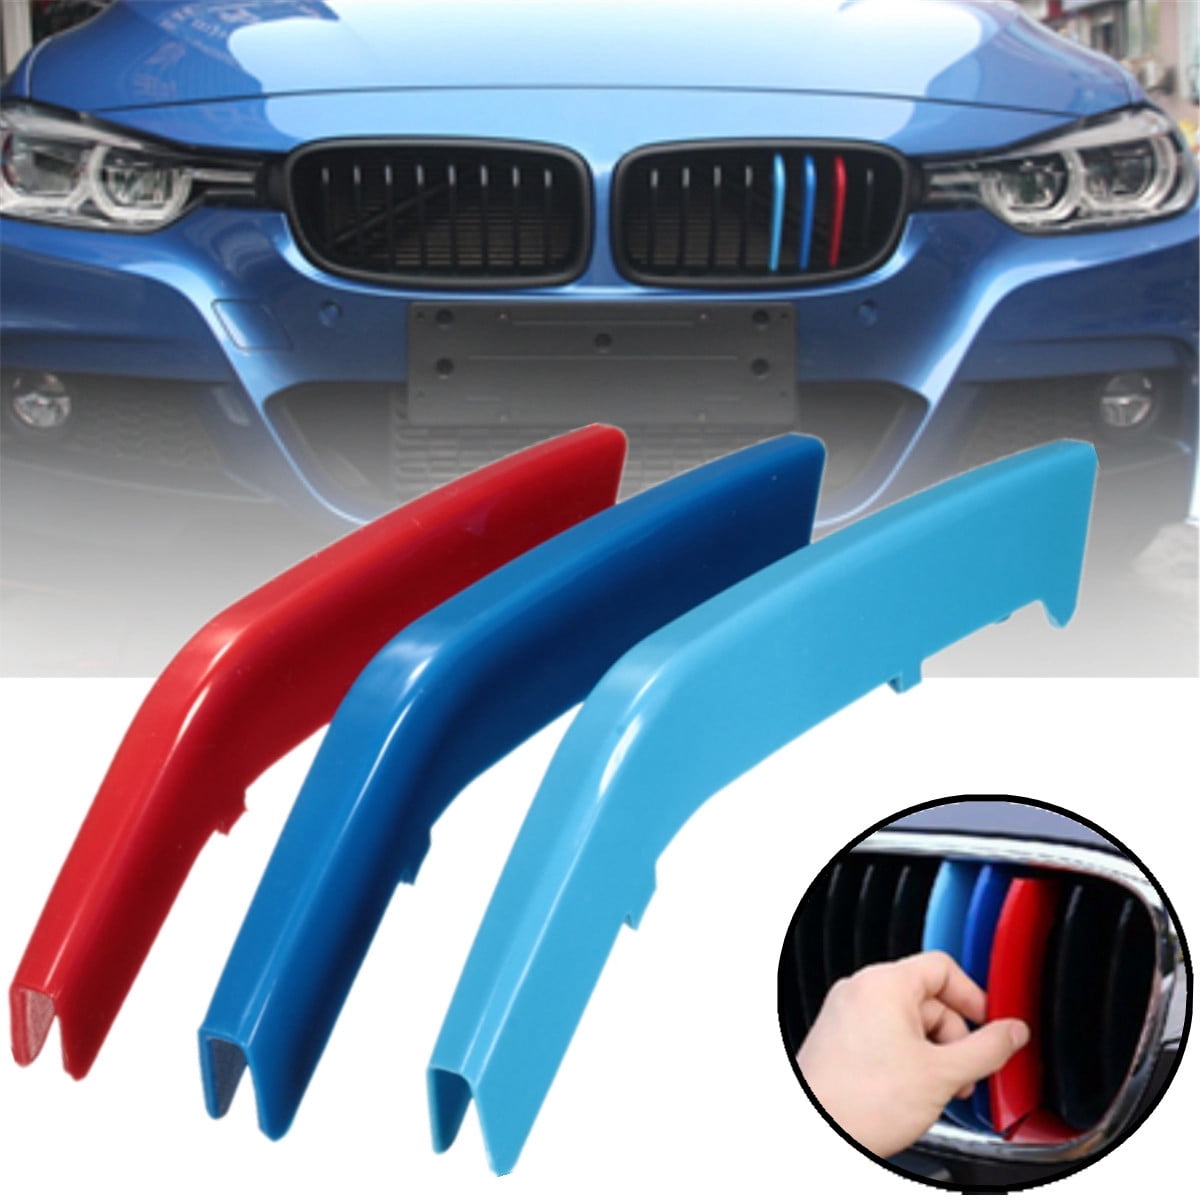 3Pcs Blue M-Color Front Grille Grill Cover Insert Trim For BMW 3 Series 2013-17